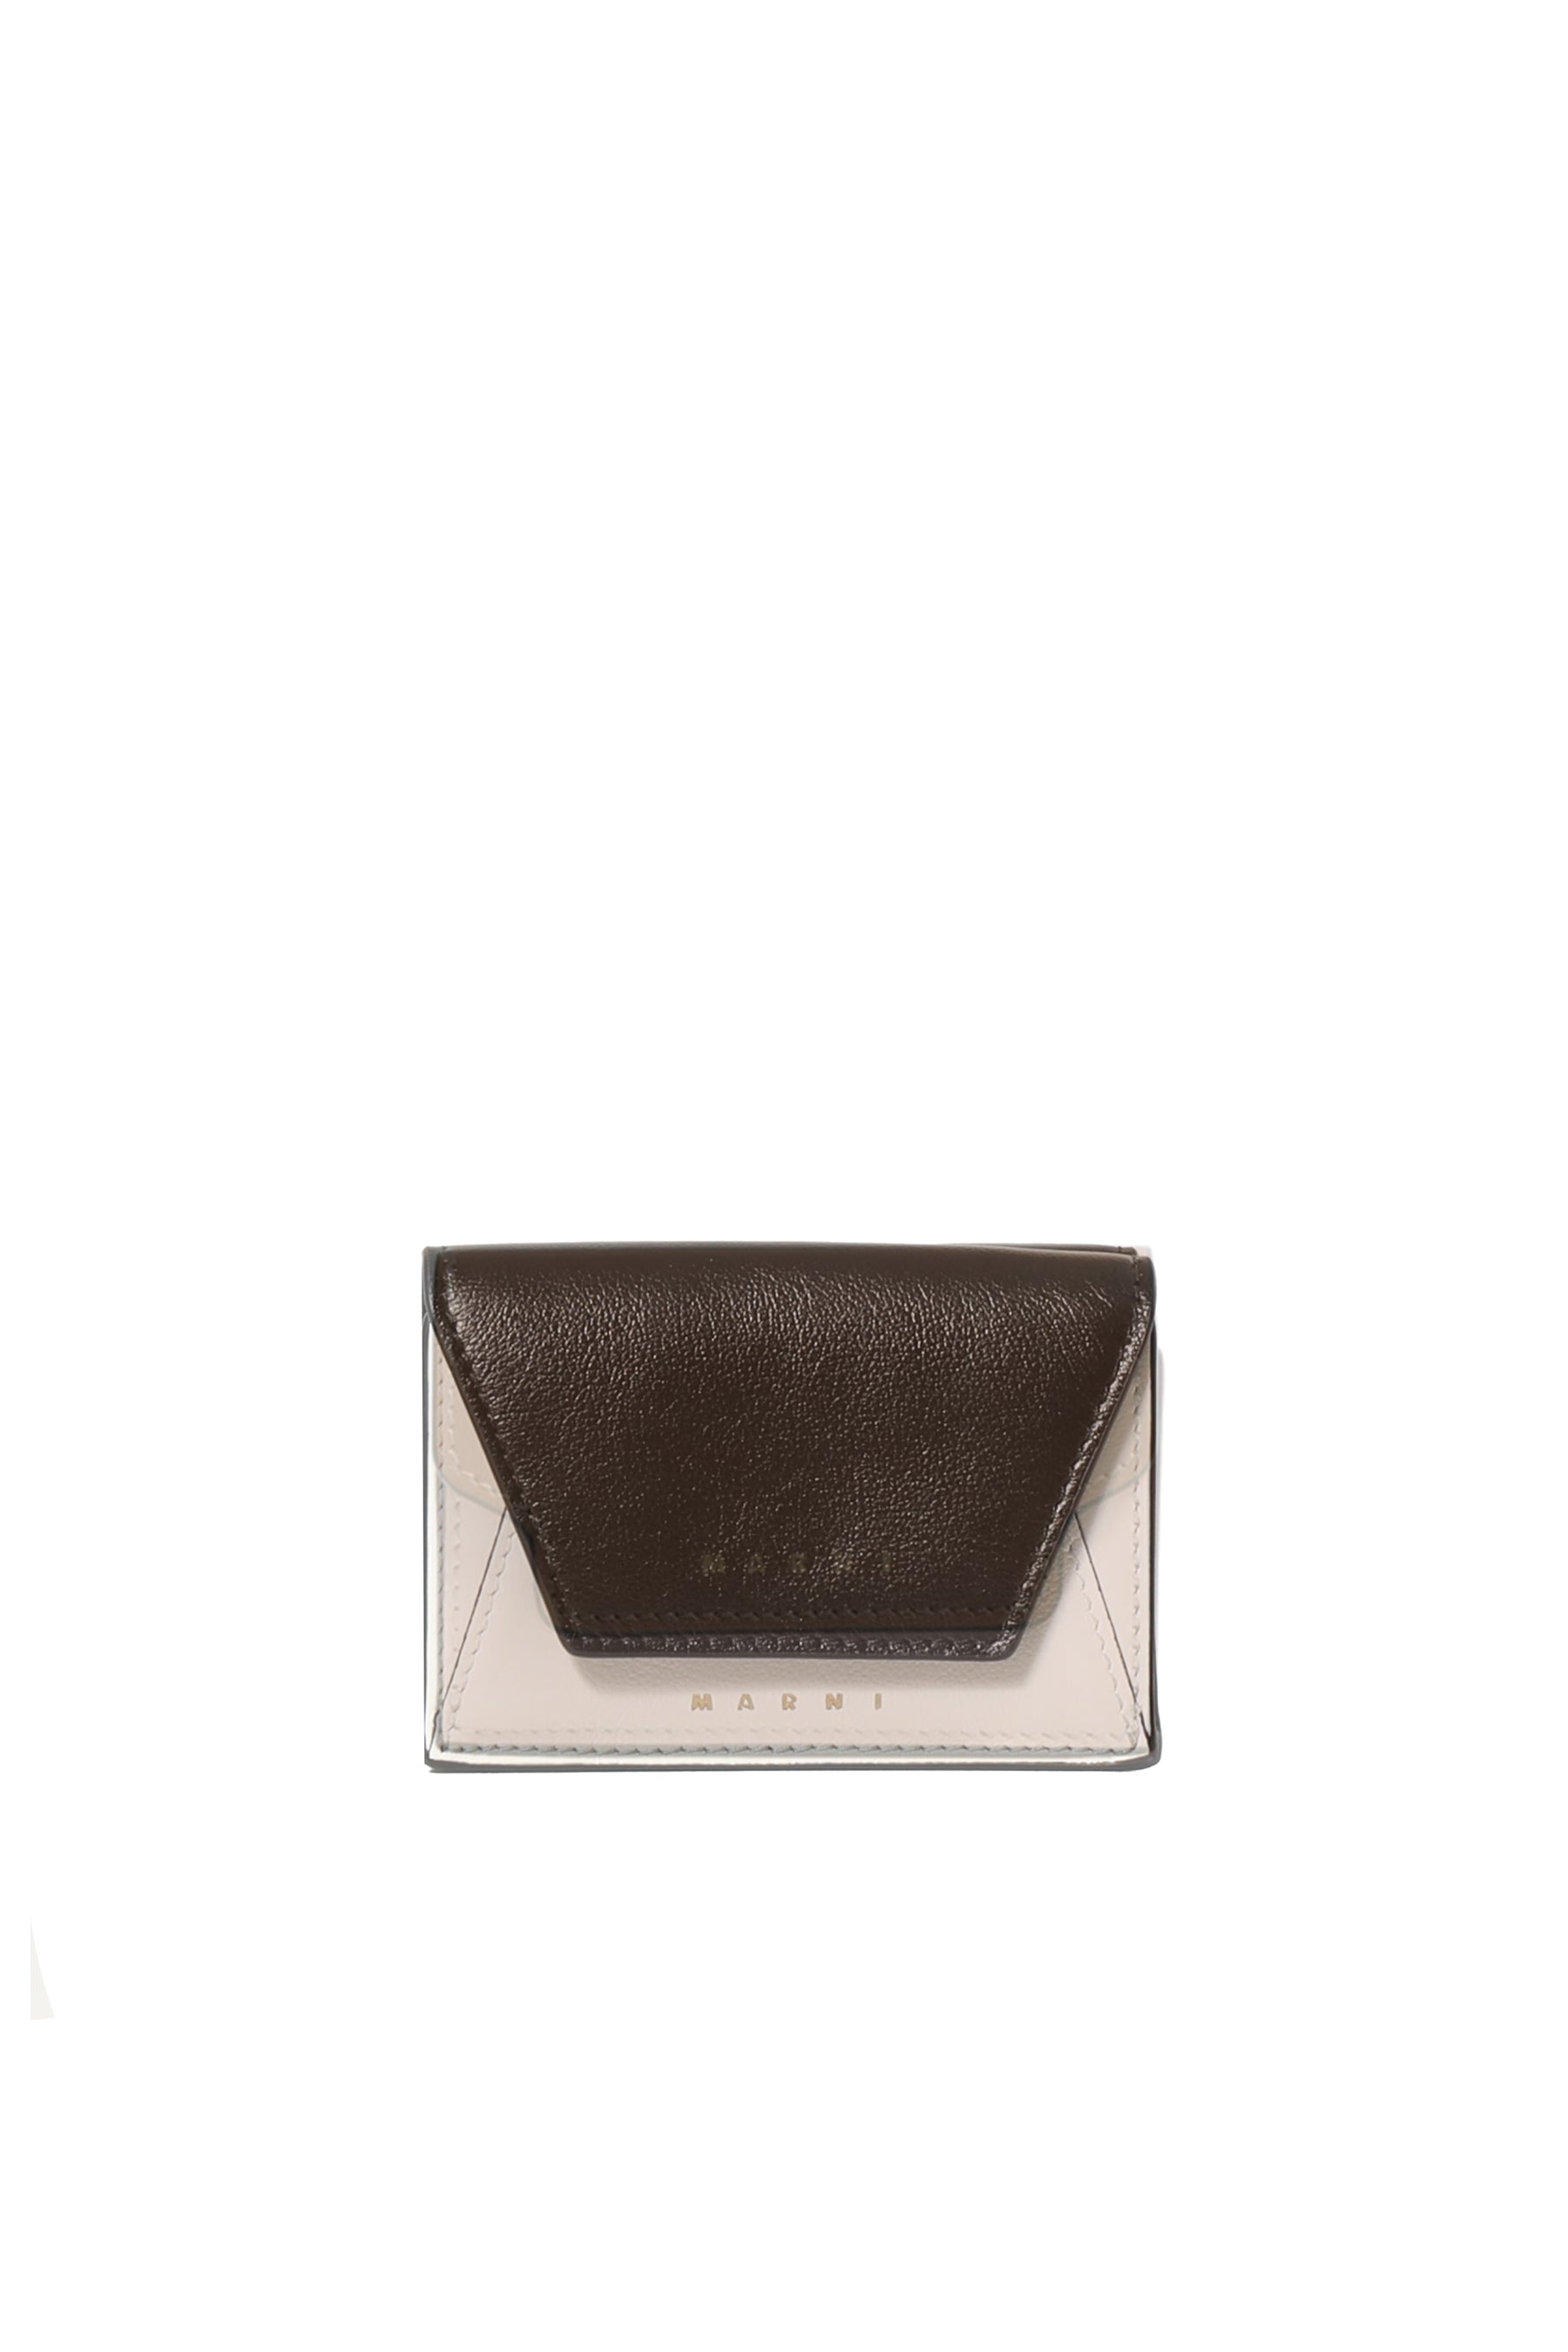 MARNI FW23 TRIFOLD WALLET / BLK/LILY WHT -NUBIAN